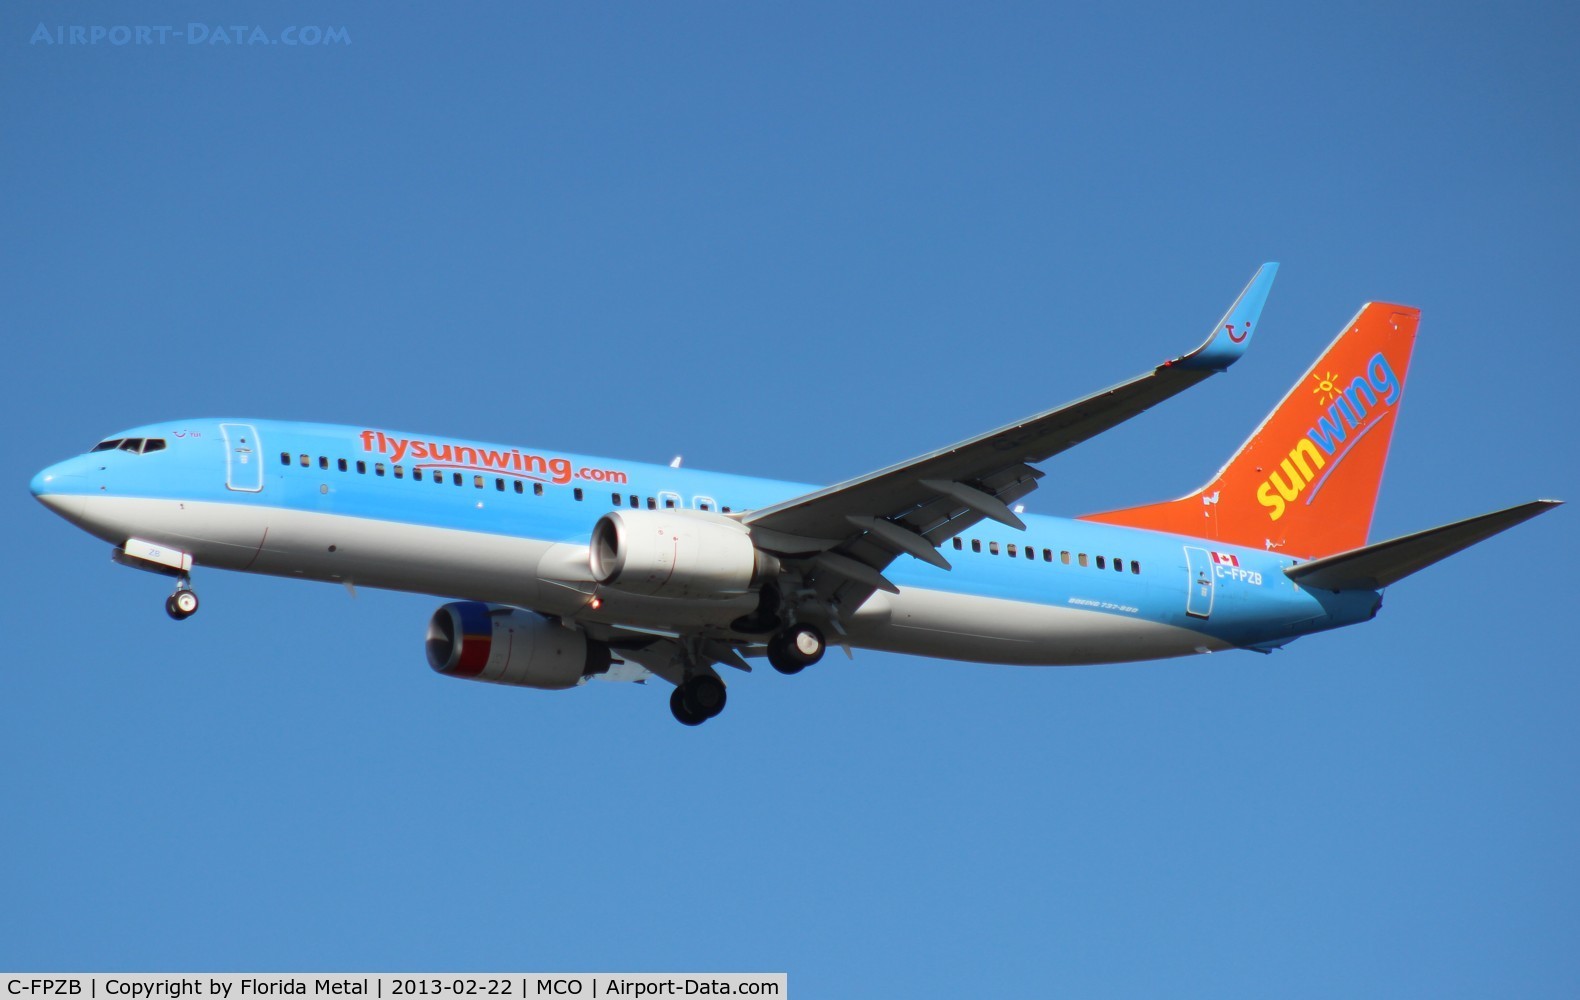 C-FPZB, 2007 Boeing 737-8K5 C/N 35131, Sunwing with TUI colors hybrid with an engine cowling right side that looks like Southwest???